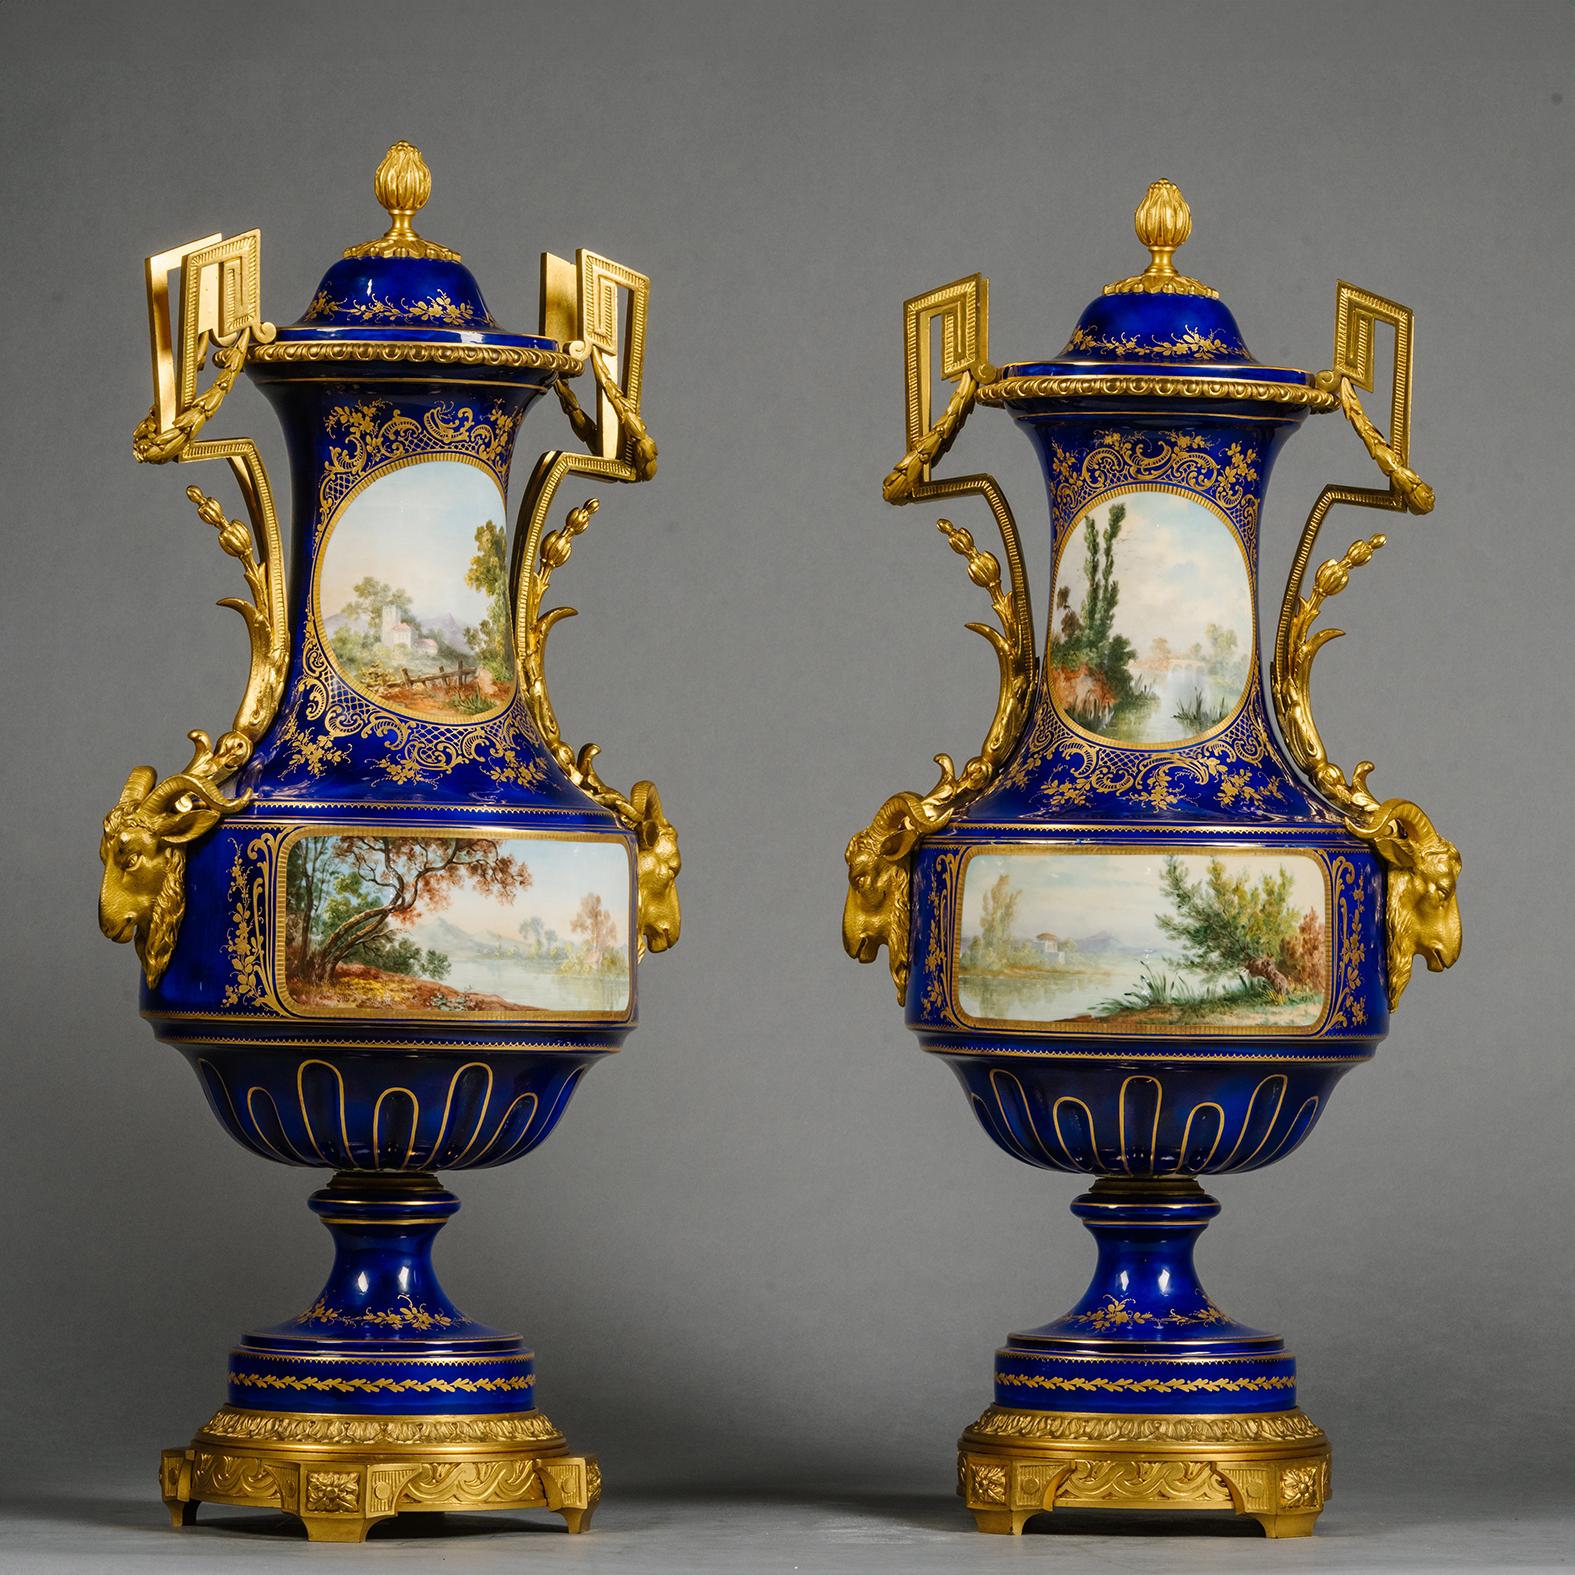 A Large Gilt-Bronze and Sèvres Style Porcelain Three-Piece Clock Garniture For Sale 2